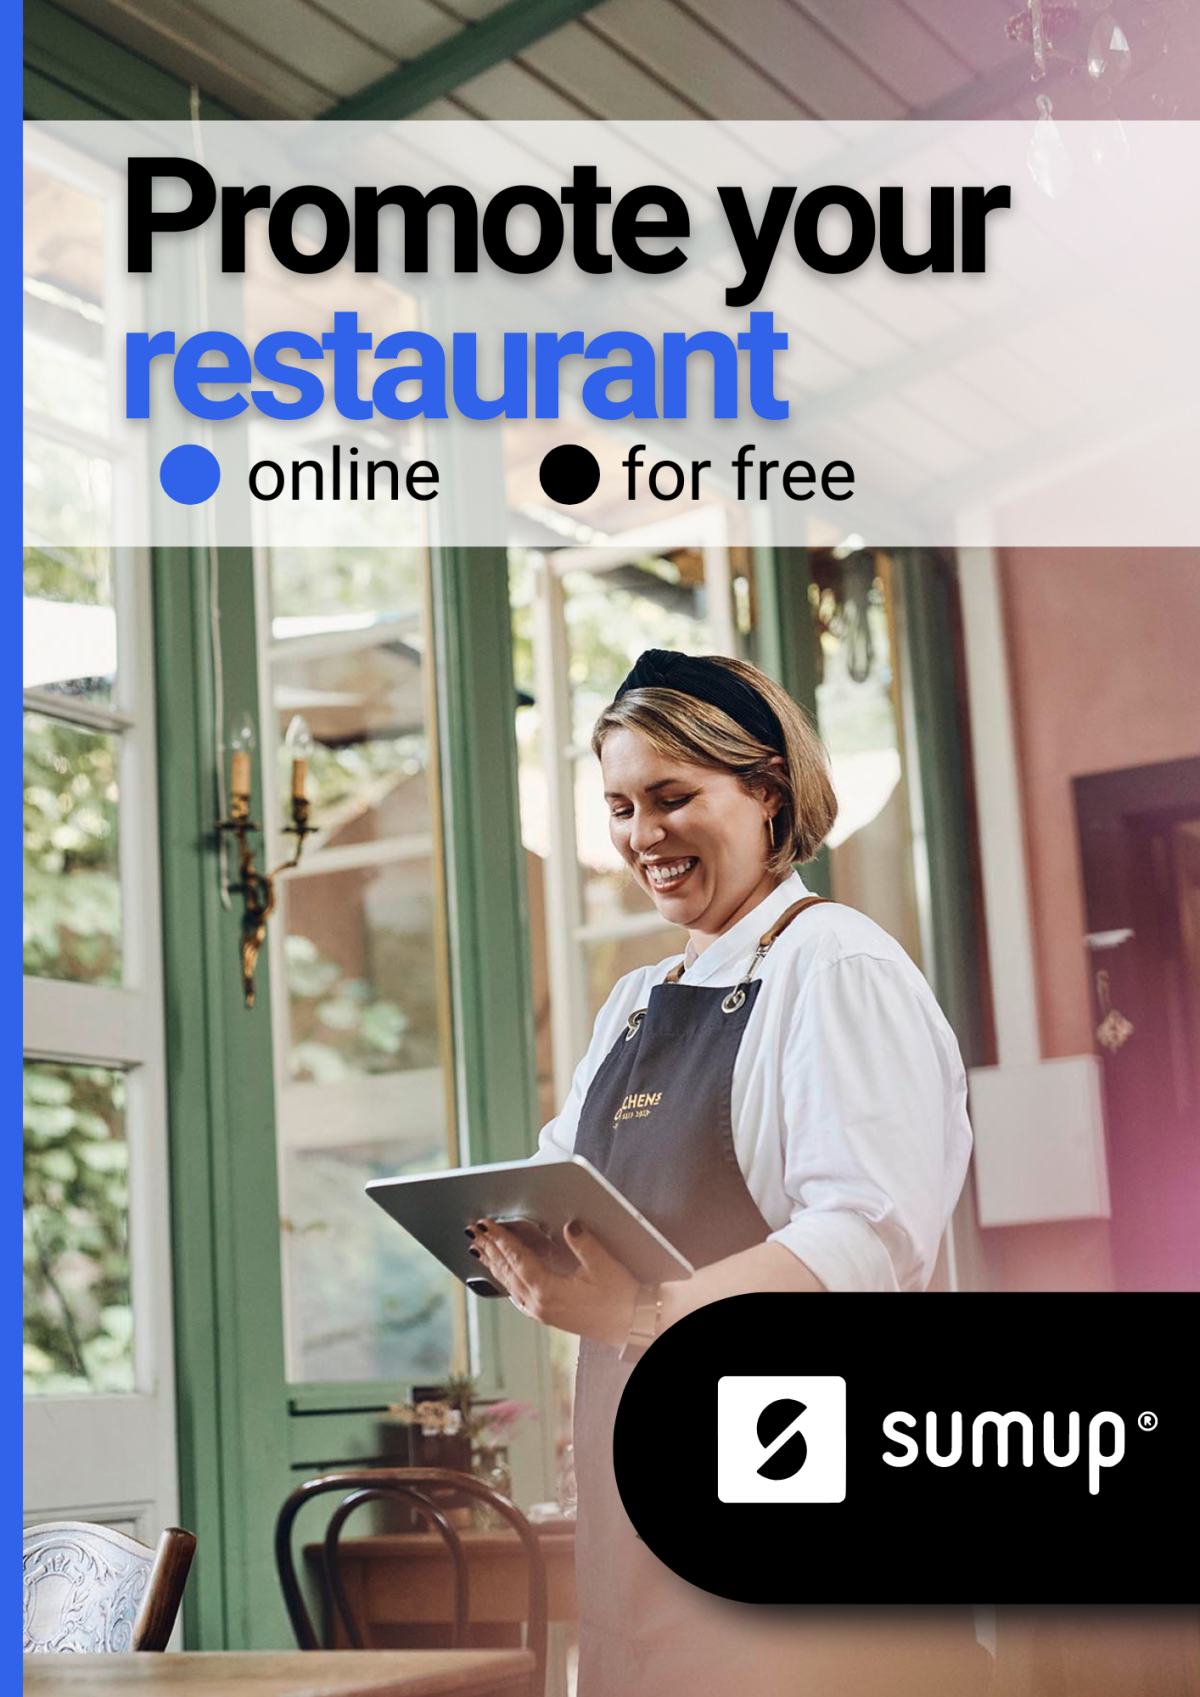 Promote your restaurant 